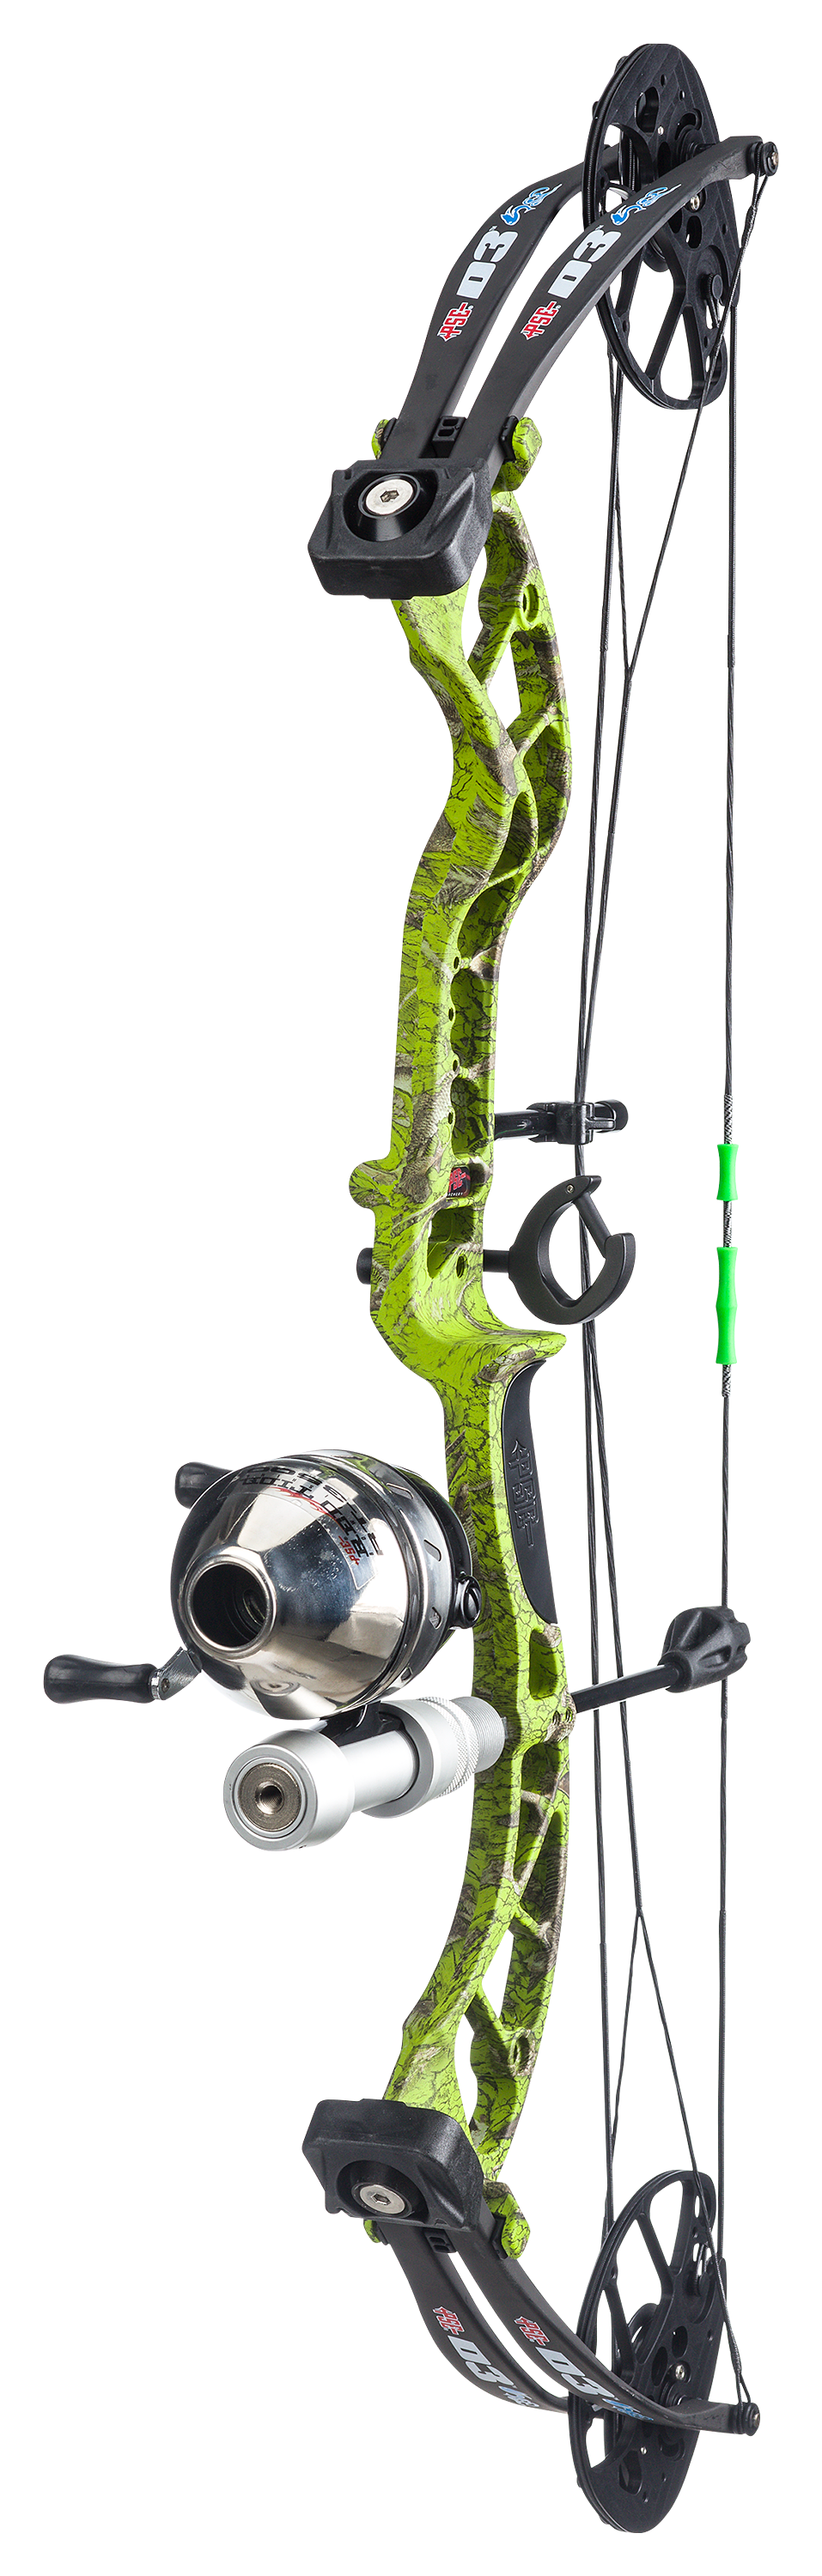 SAS Bowfishing Bottle Reel with 33 Yards Dyneema Line Compound Bow